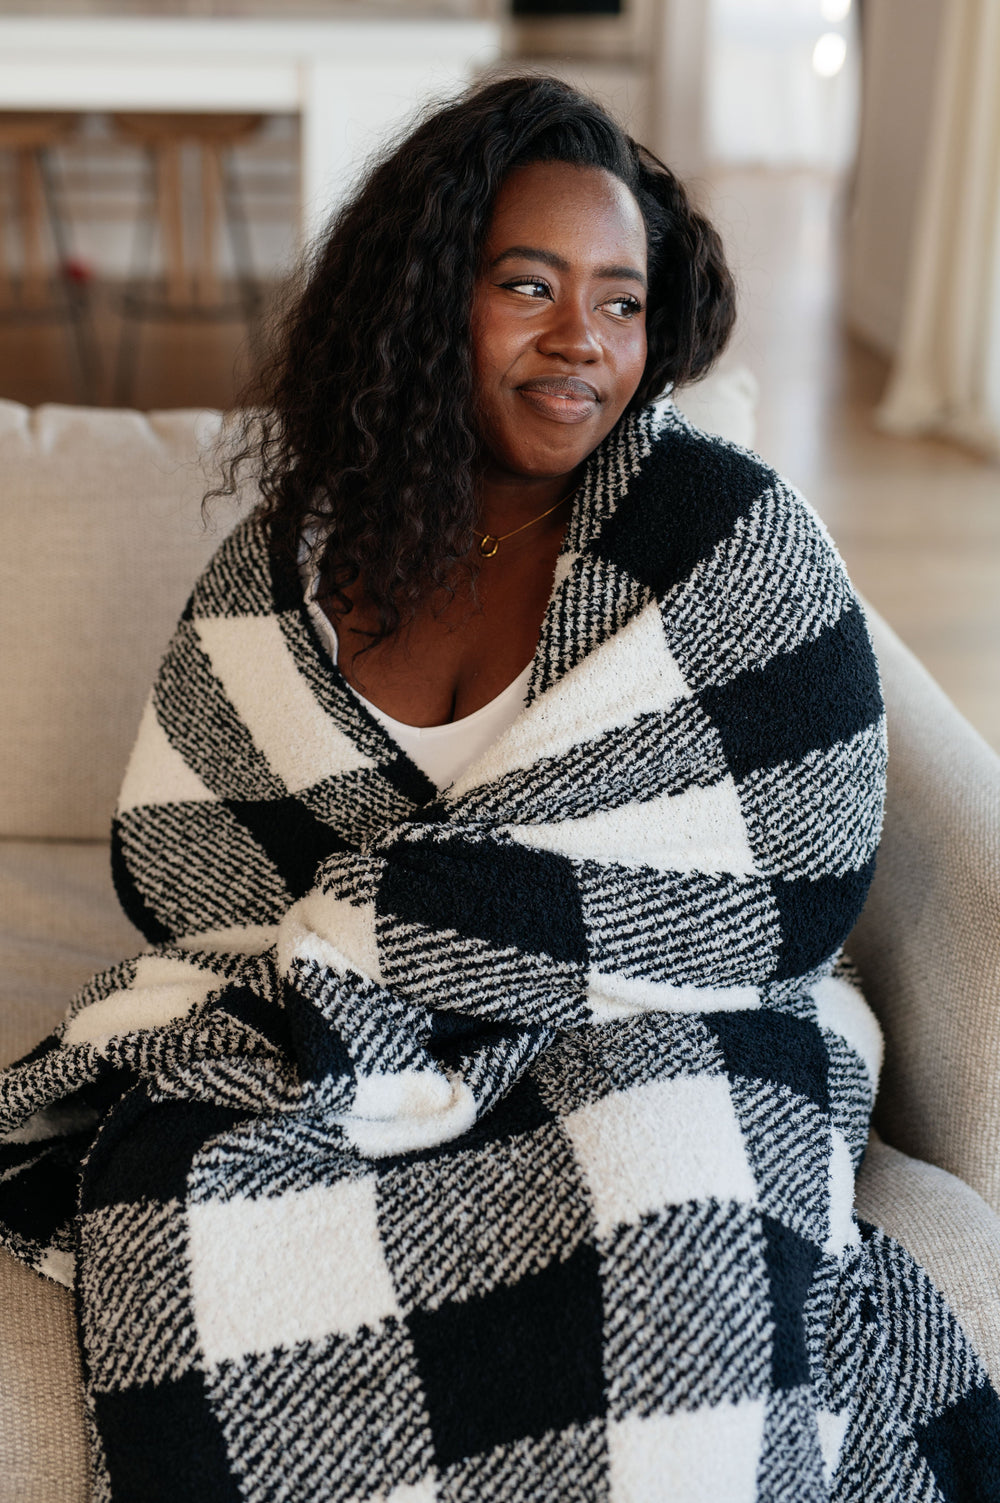 Penny Blanket Single Cuddle Size in Plaid-220 Beauty/Gift-Inspired by Justeen-Women's Clothing Boutique in Chicago, Illinois